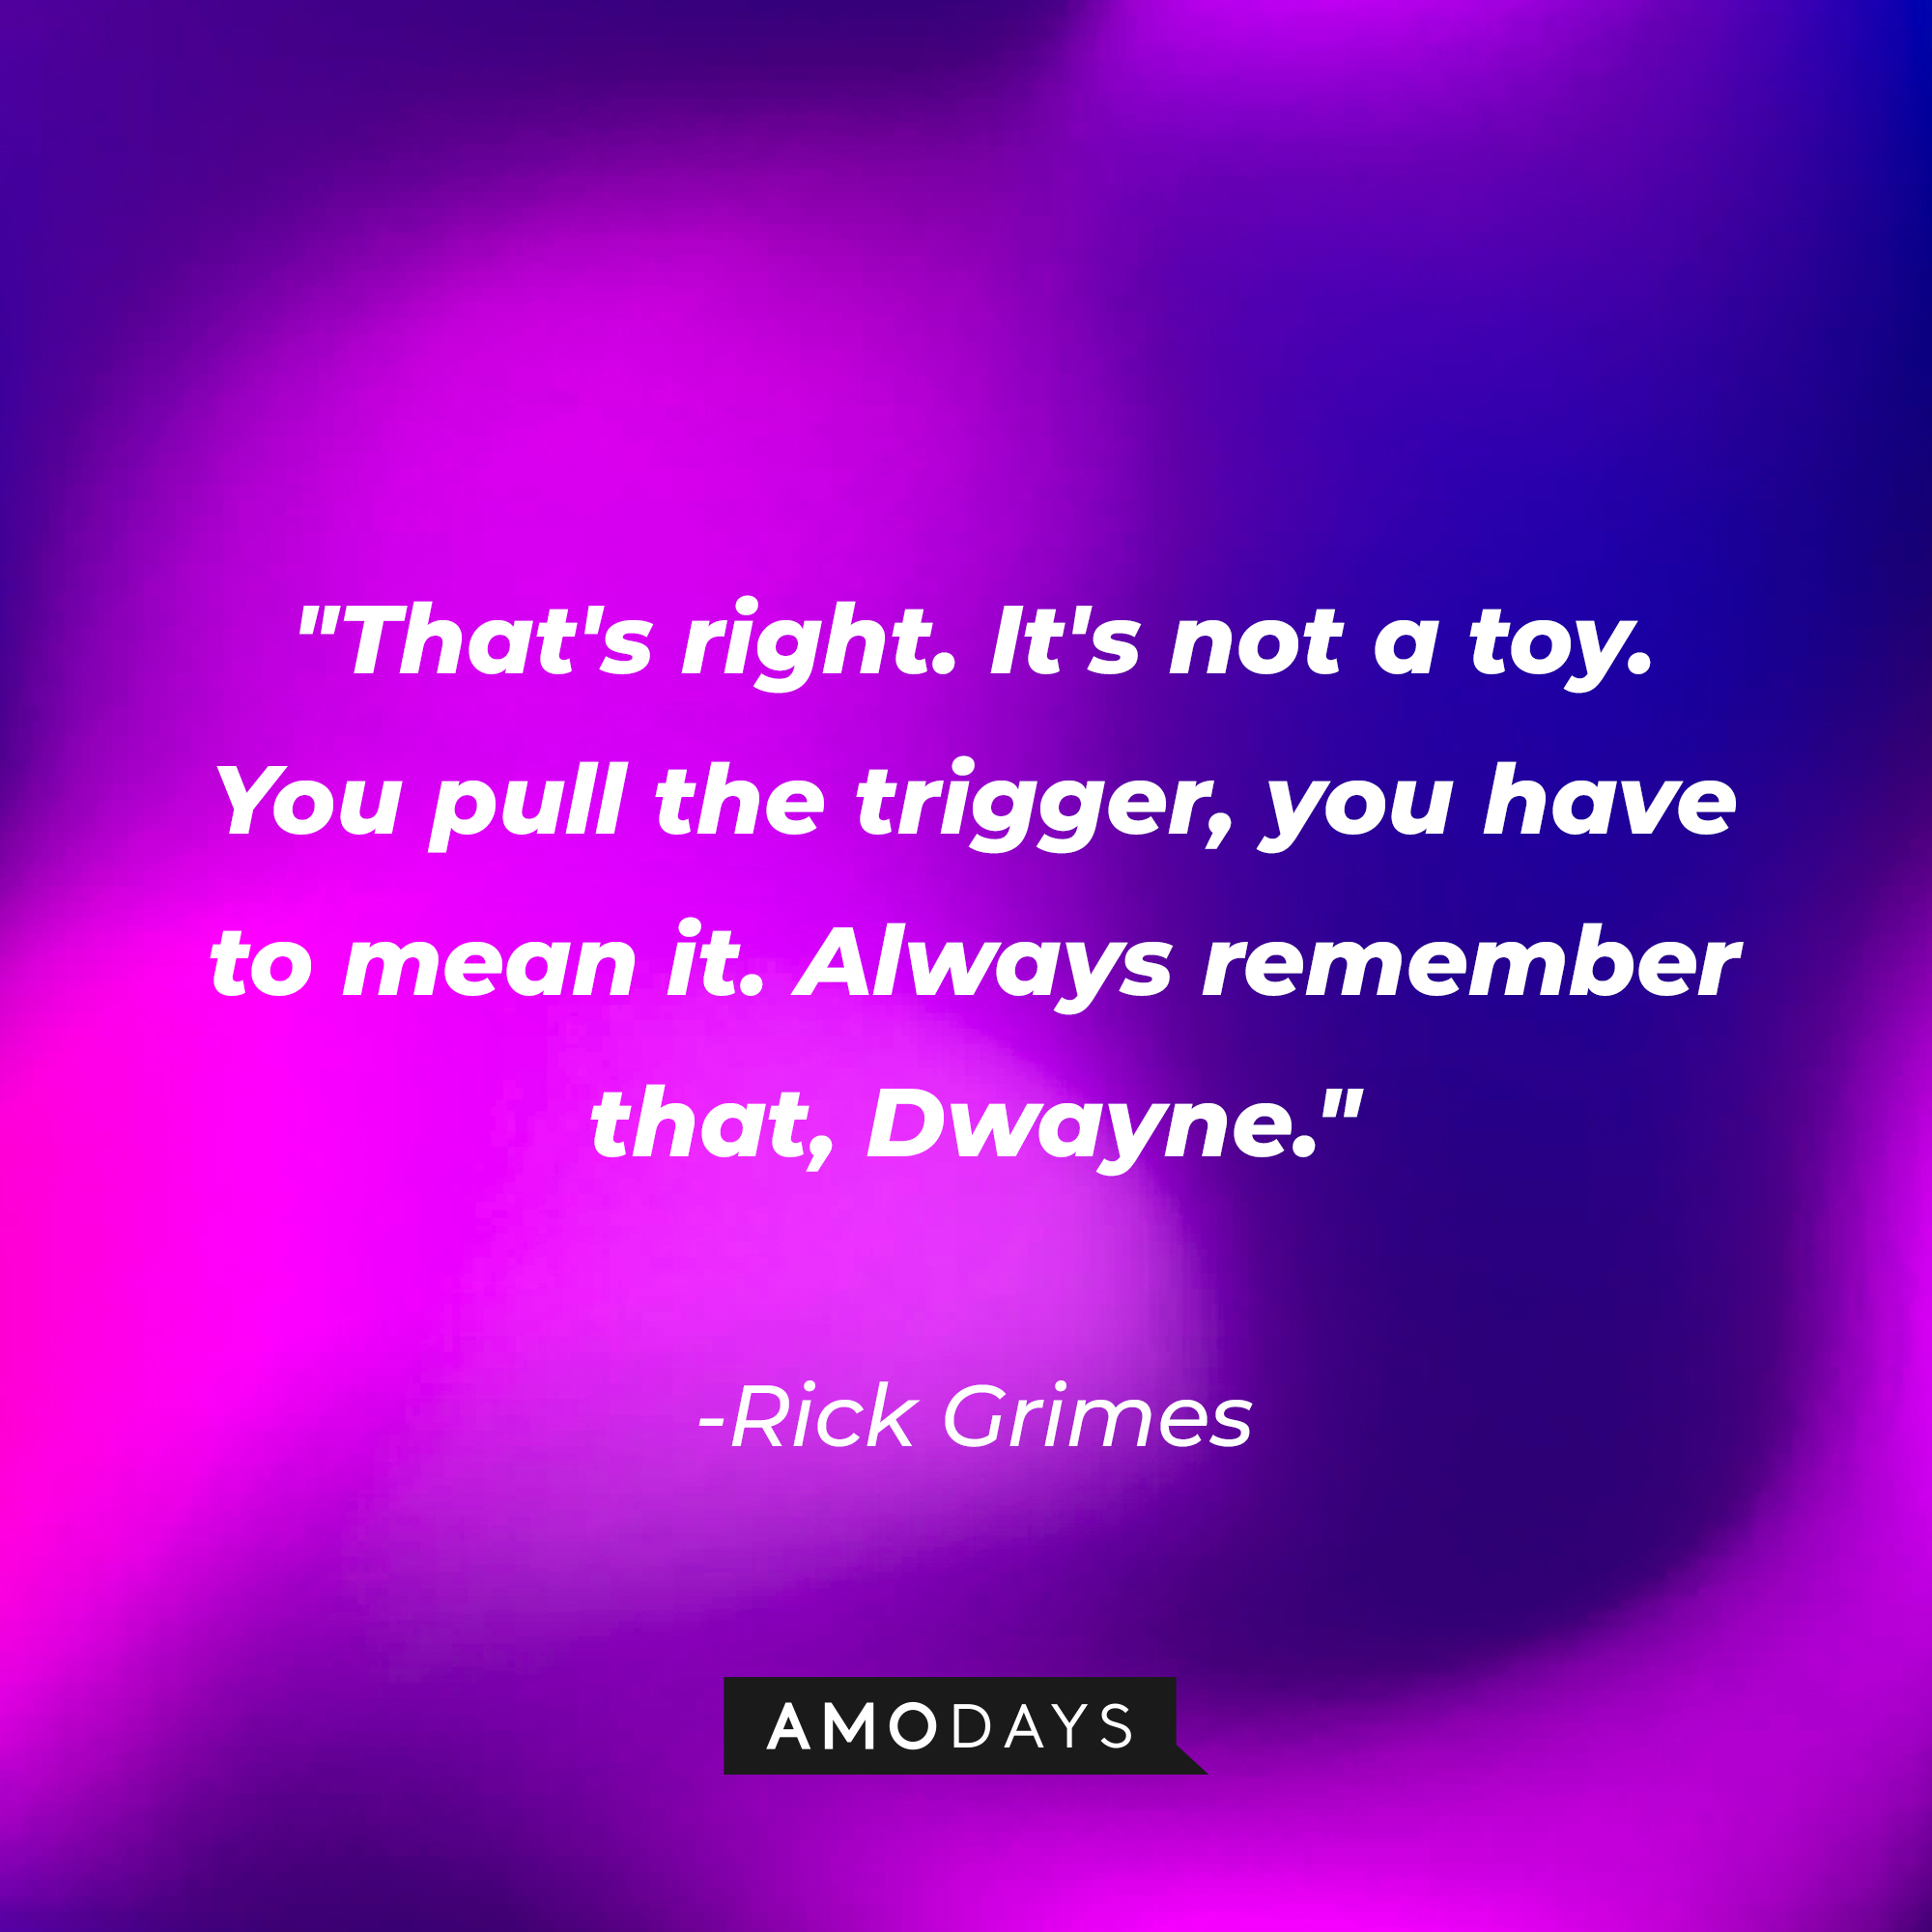 Rick Grimes' quote: "That's right. It's not a toy. You pull the trigger, you have to mean it. Always remember that, Dwayne." | Source: AmoDays